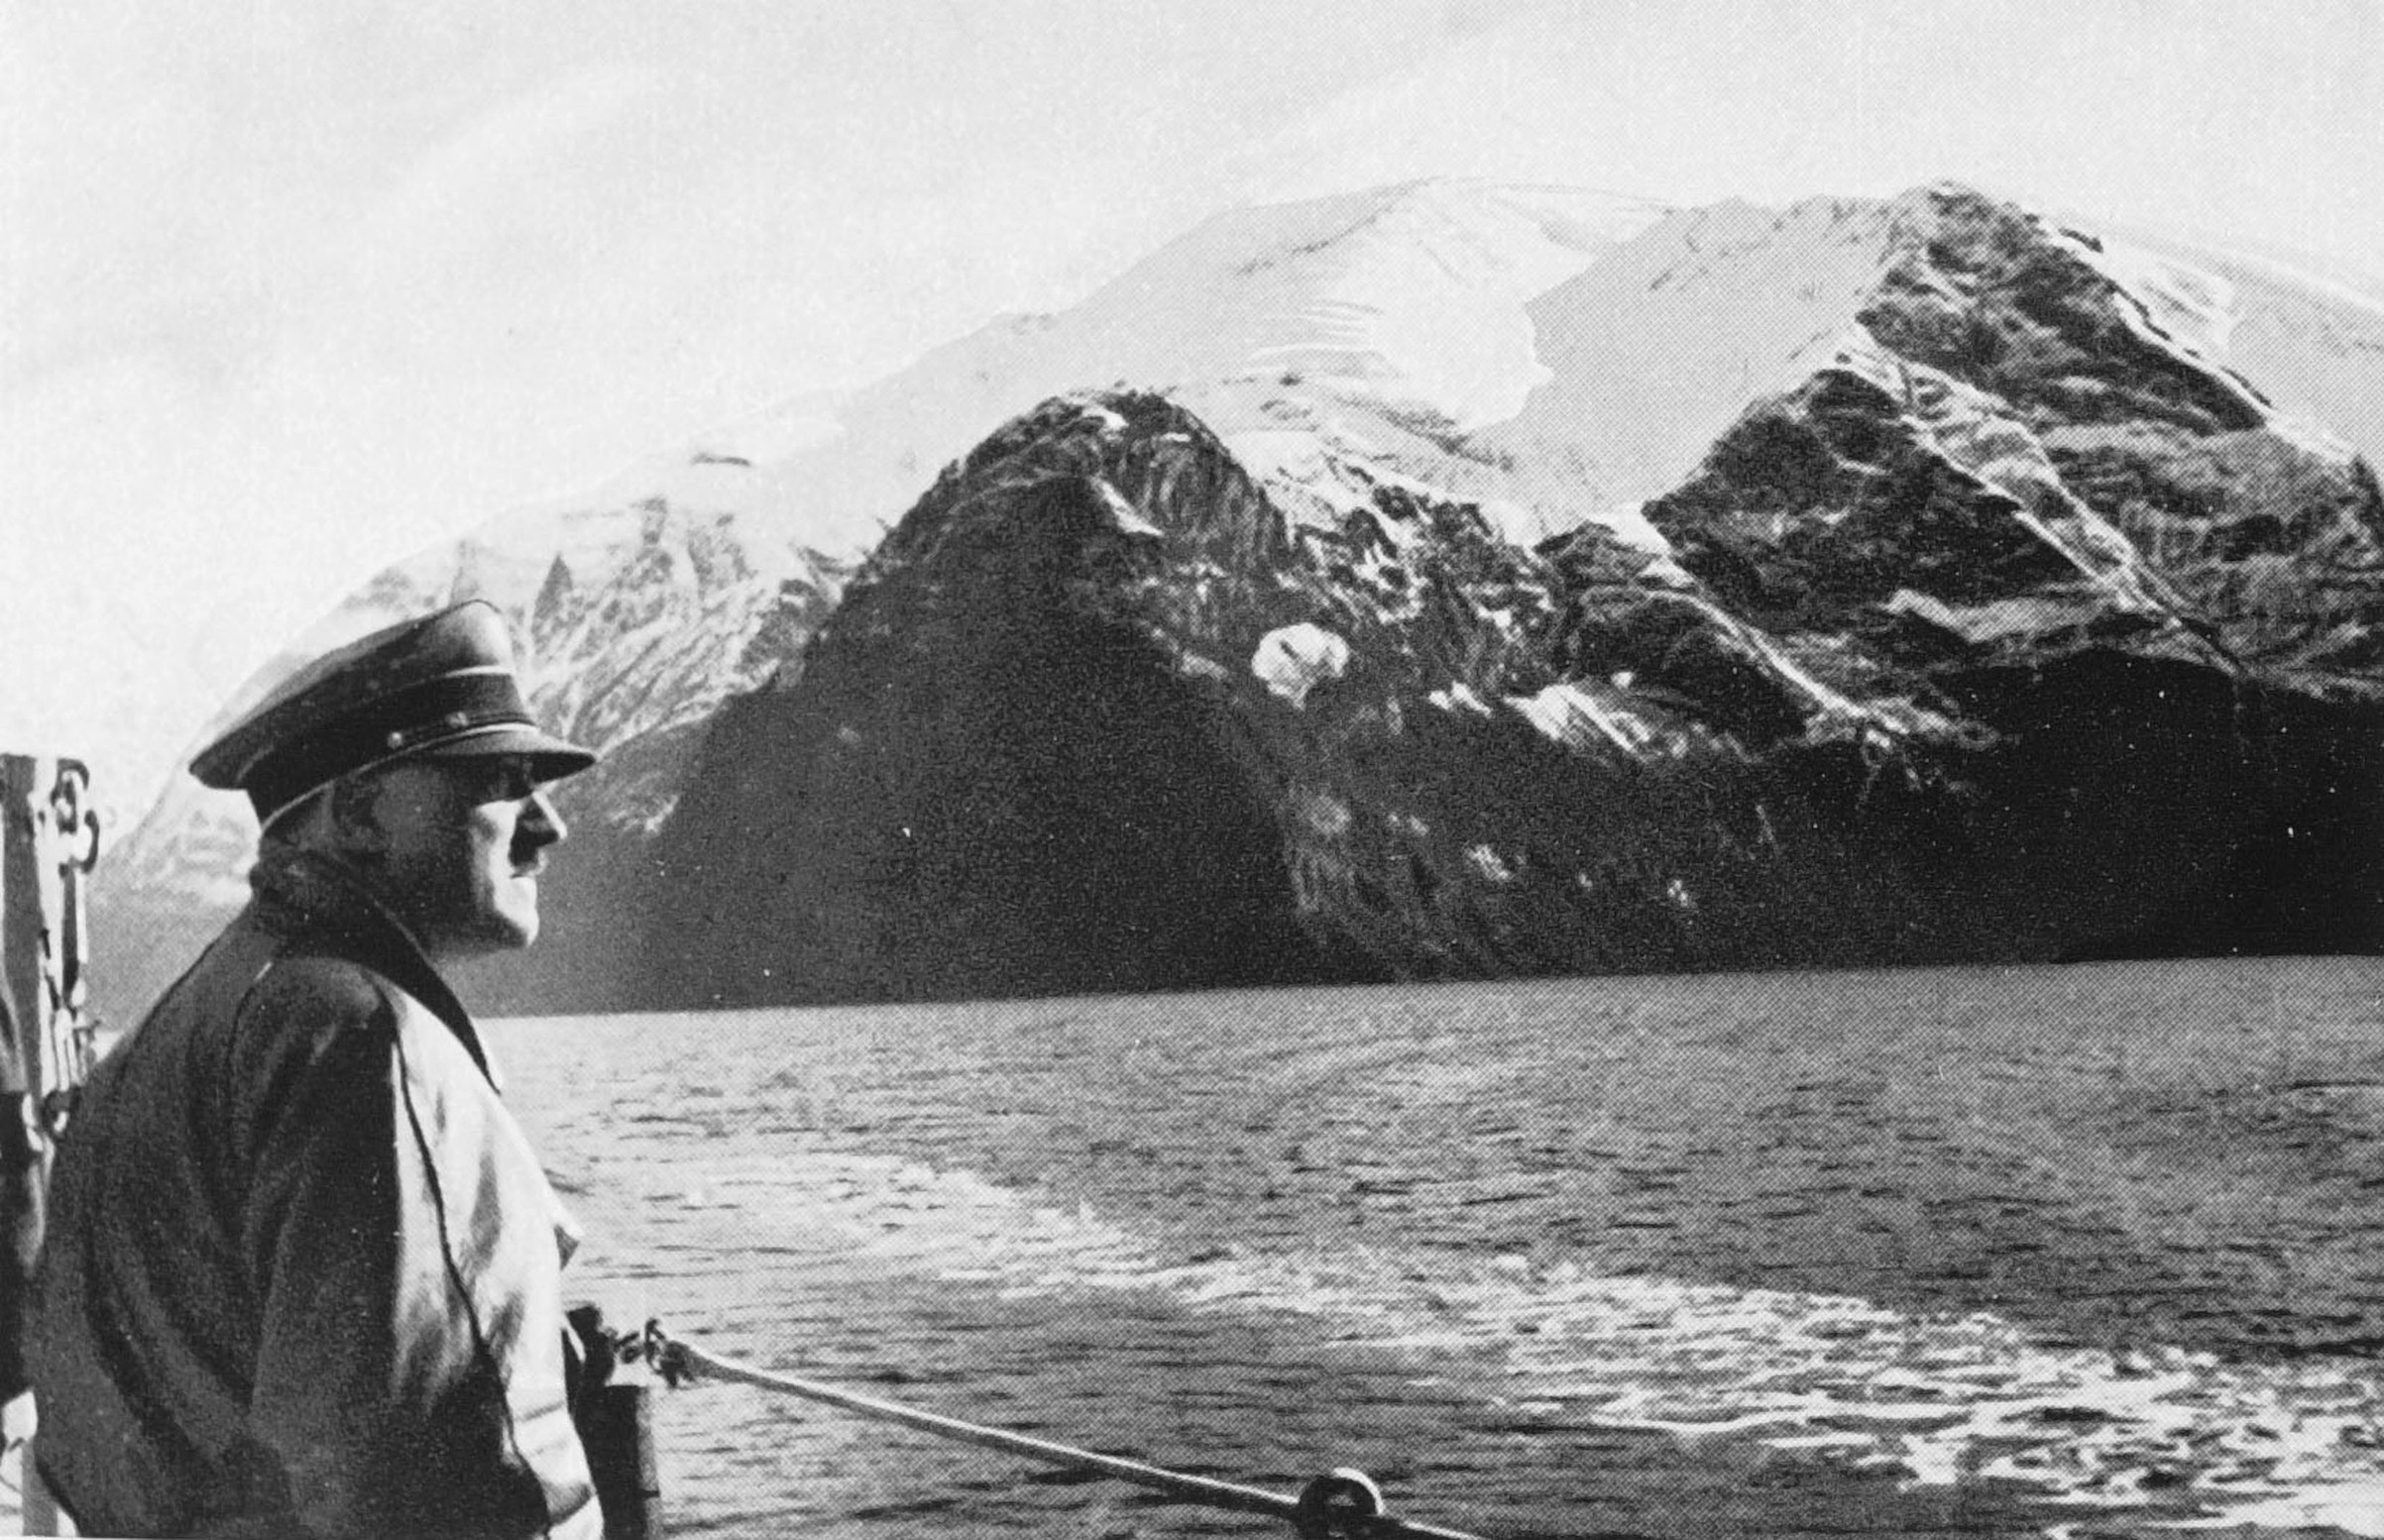 Adolf Hitler visiting the Norwegian fjords abord a war ship, in 1934. (Universal Images Group / Getty)